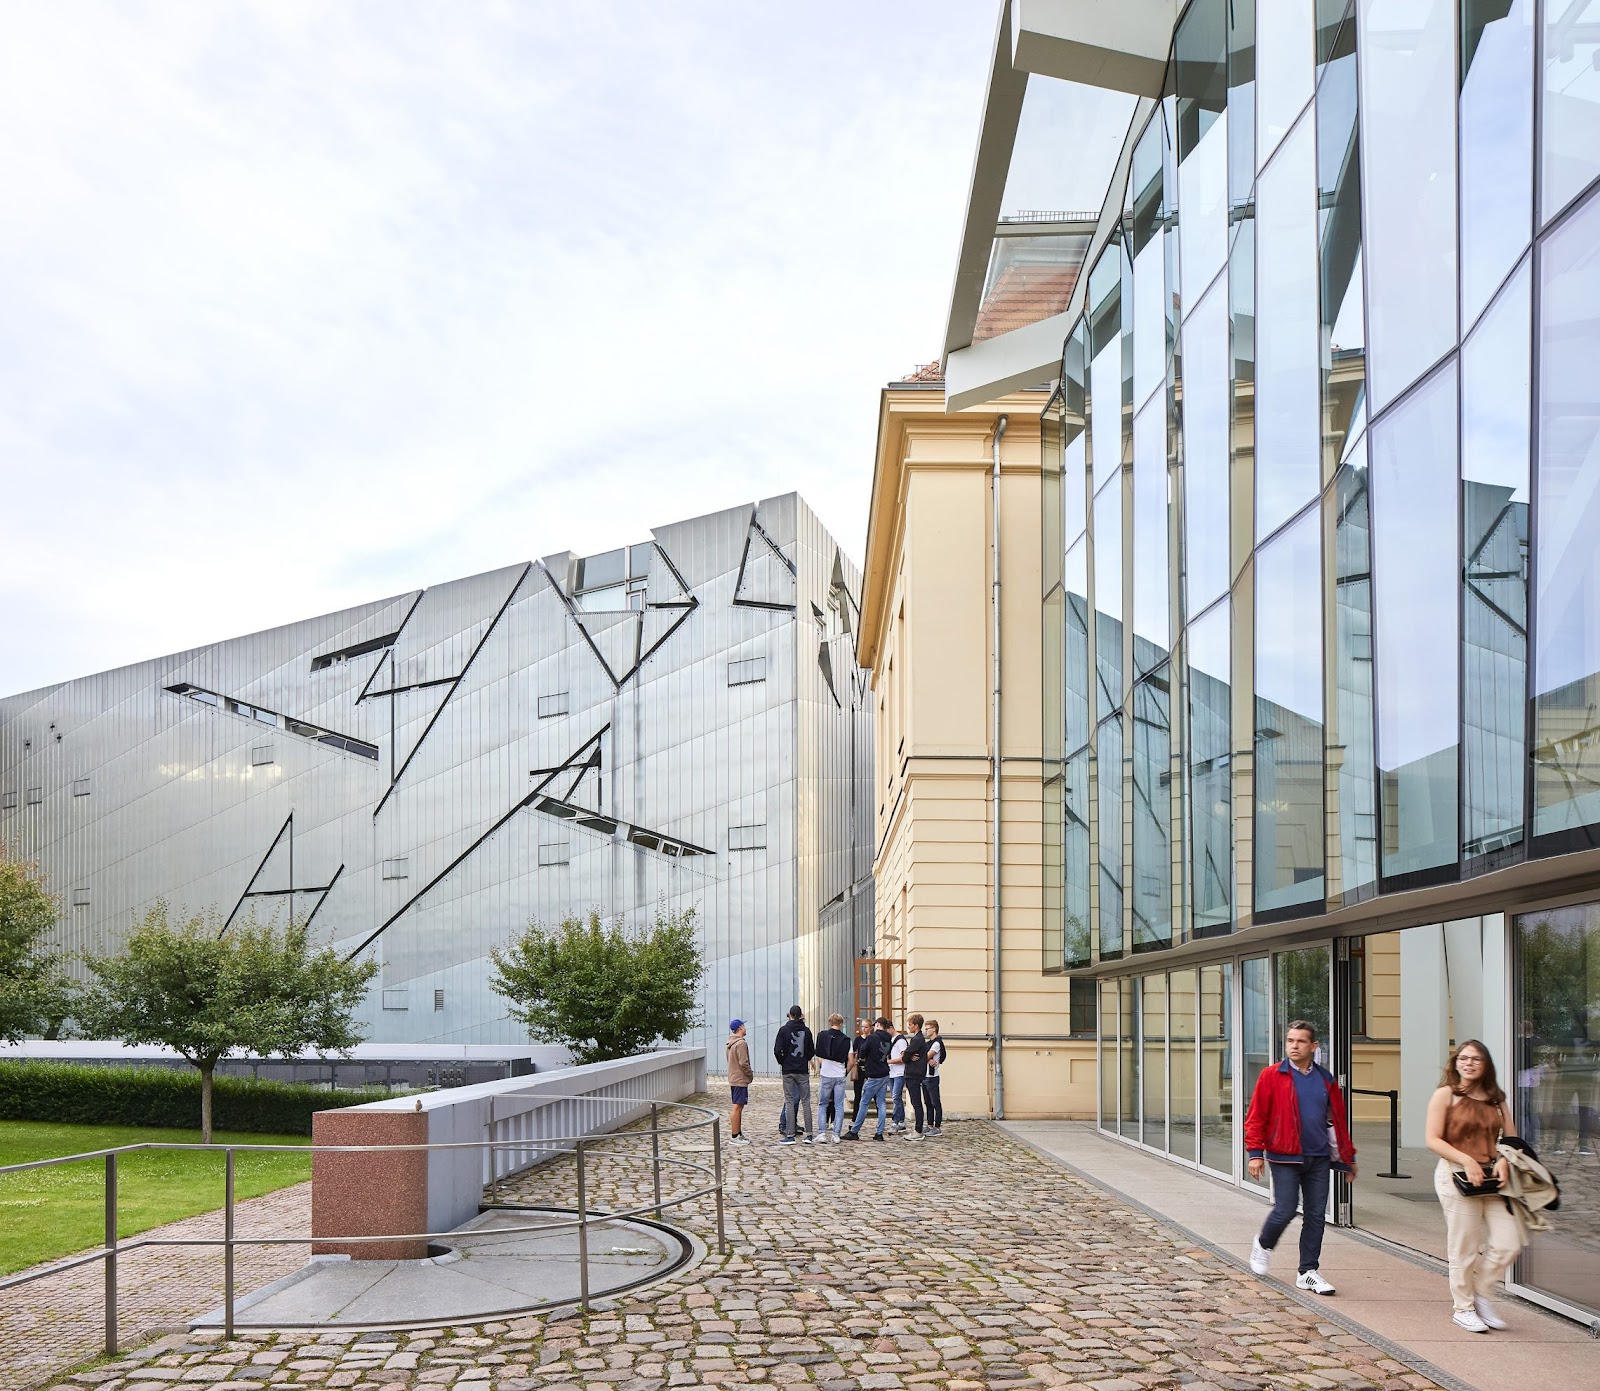 The Jewish Museum of Berlin by Daniel Libeskind